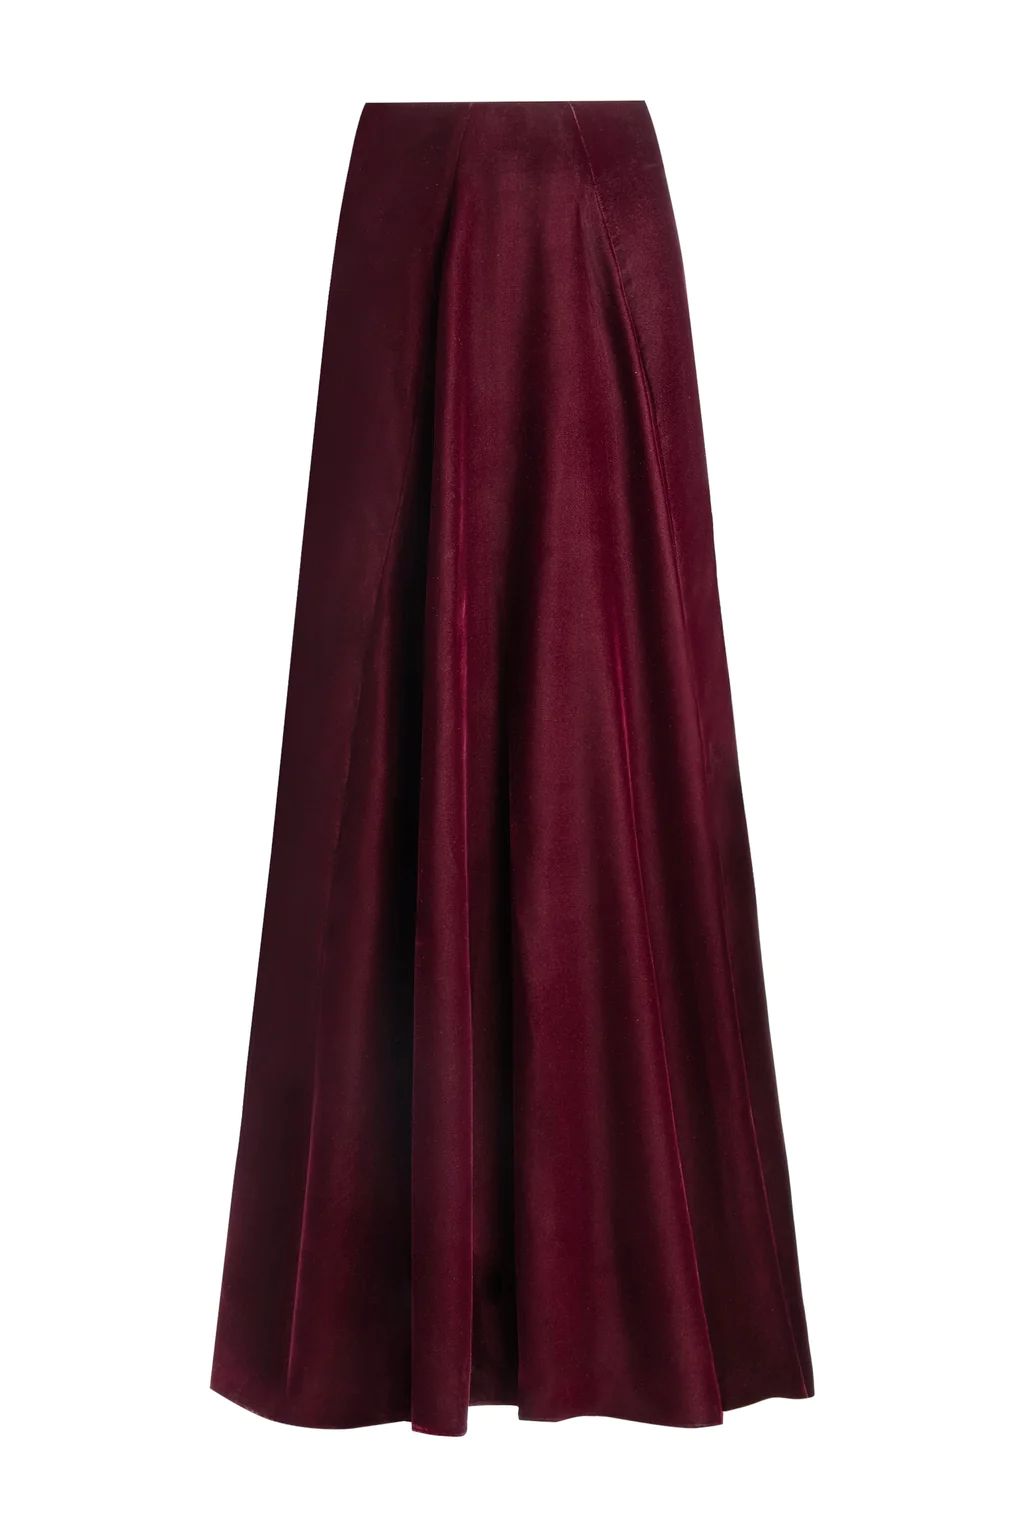 Persica Maxi Velvet Skirt - Burgundy (Limited Edition) | Rosewater Collective